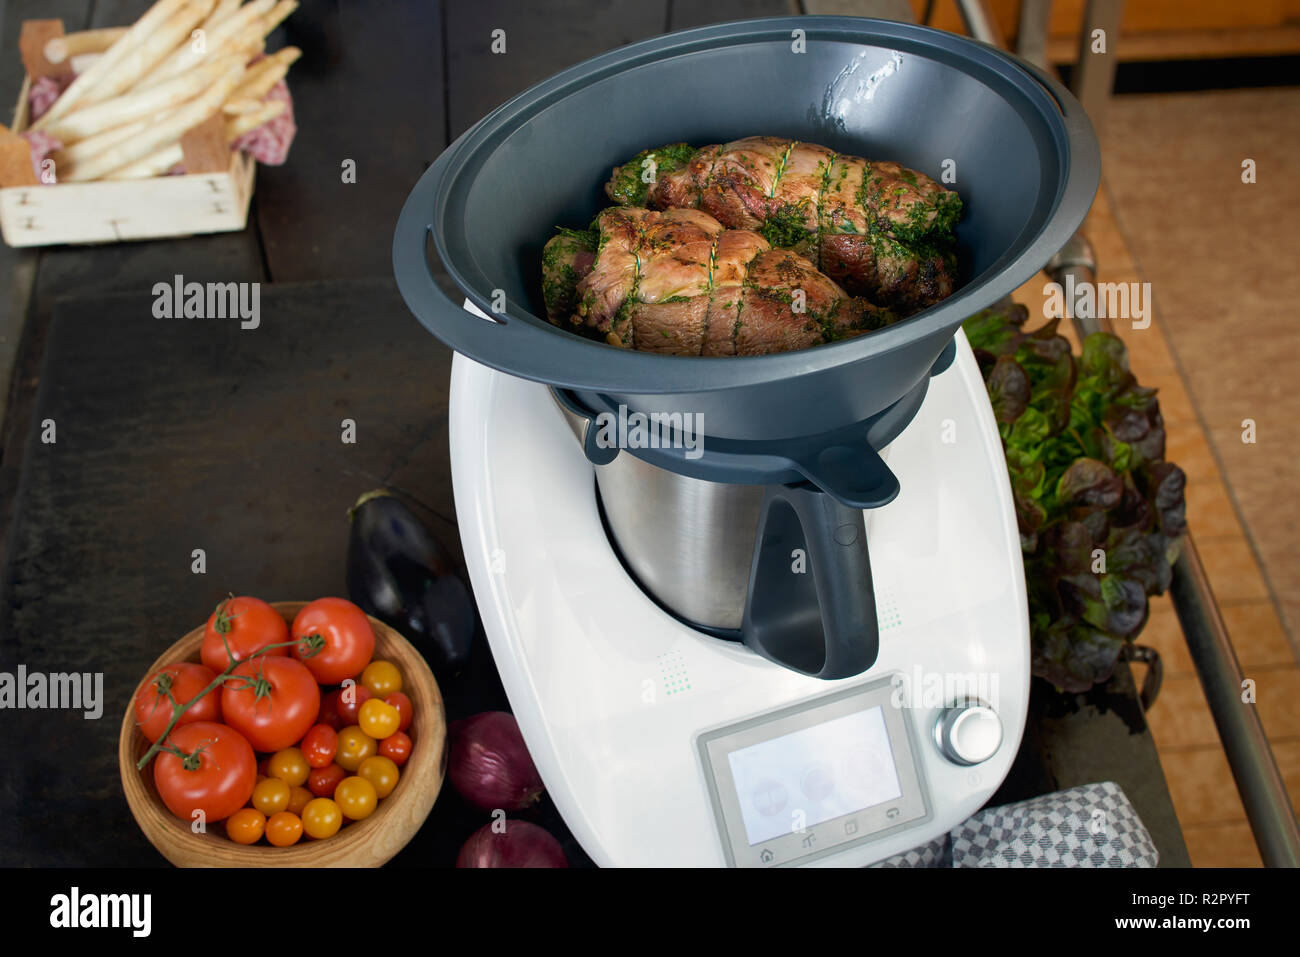 Photo series, step-by-step preparation of a leg of lamb filled with herbs  and Provençal vegetables by using a food processor (Thermomix ® and Varoma  ®), placing the leg of lamb in the